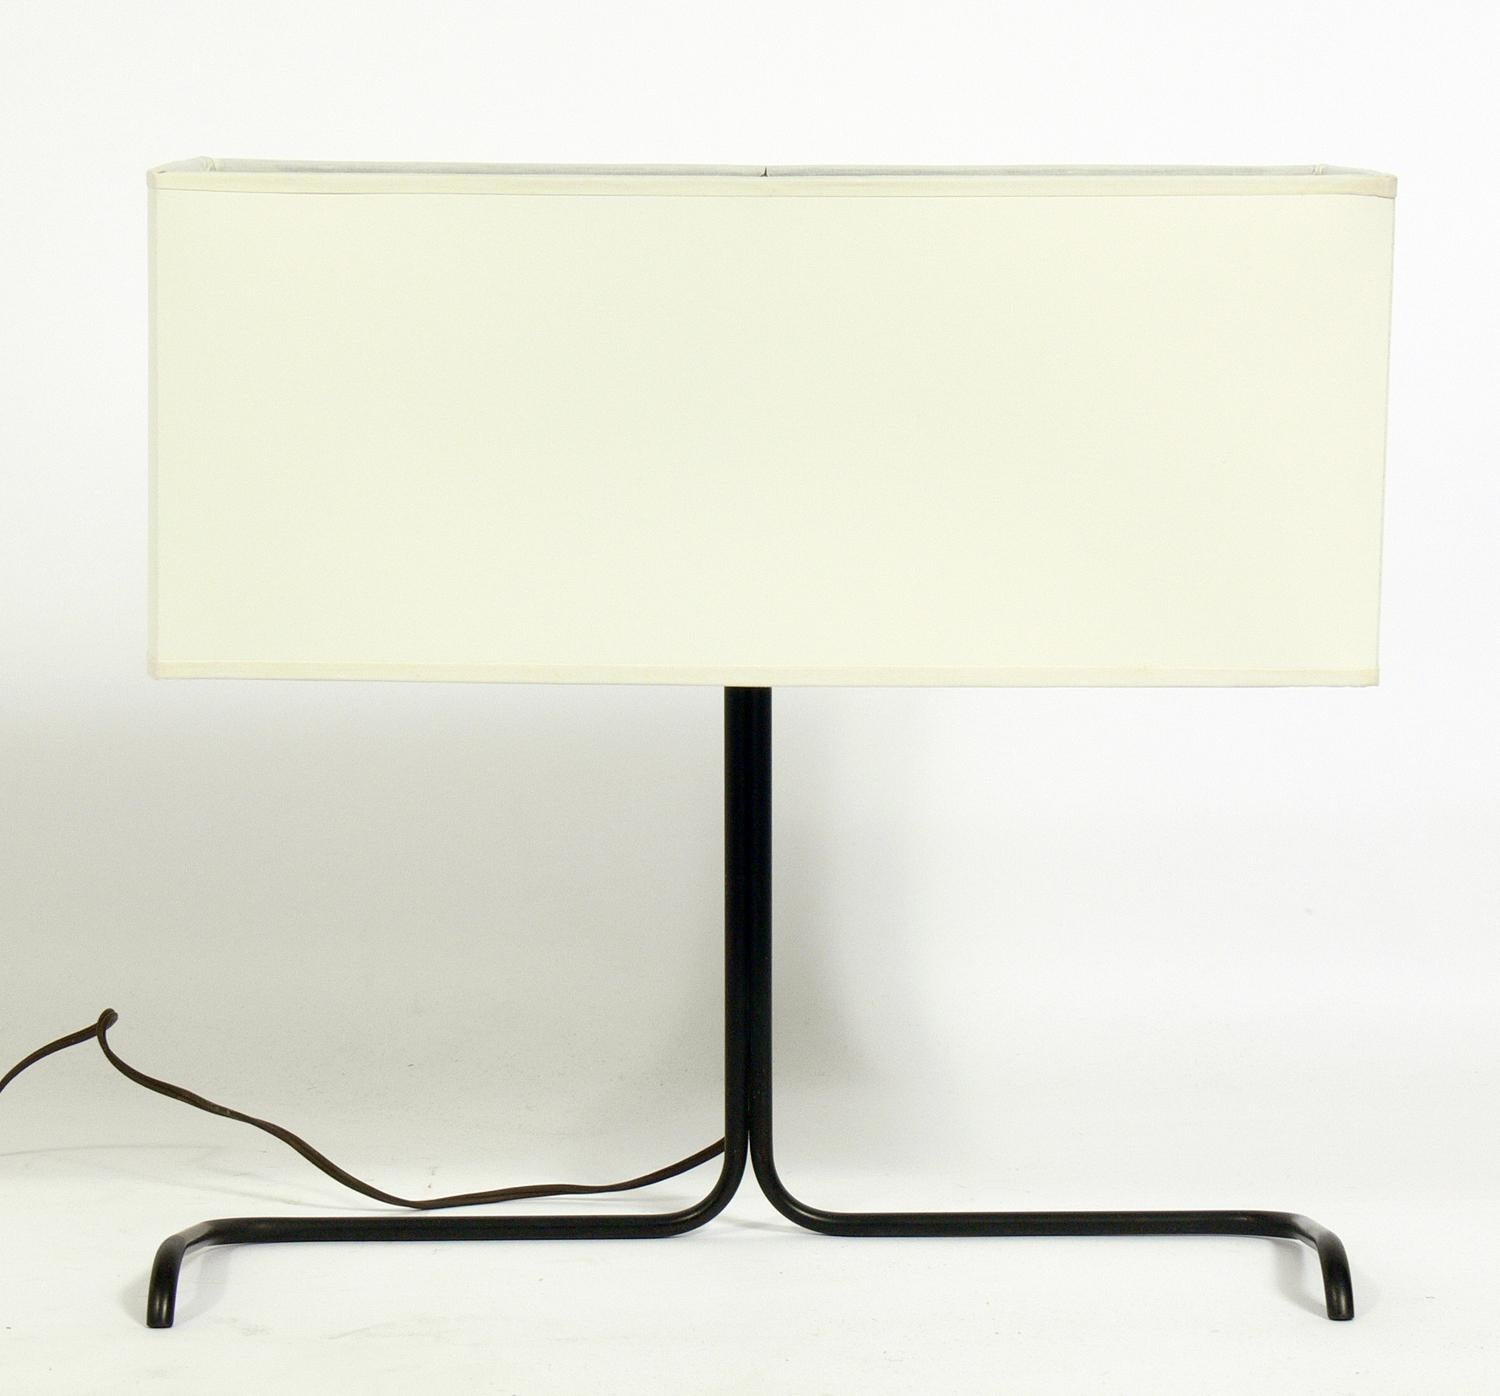 Rare cantilevered desk lamp by Gerald Thurston for Lightolier, American, circa 1950s. Paper lamp shade has been accurately replaced using the original shade frame.